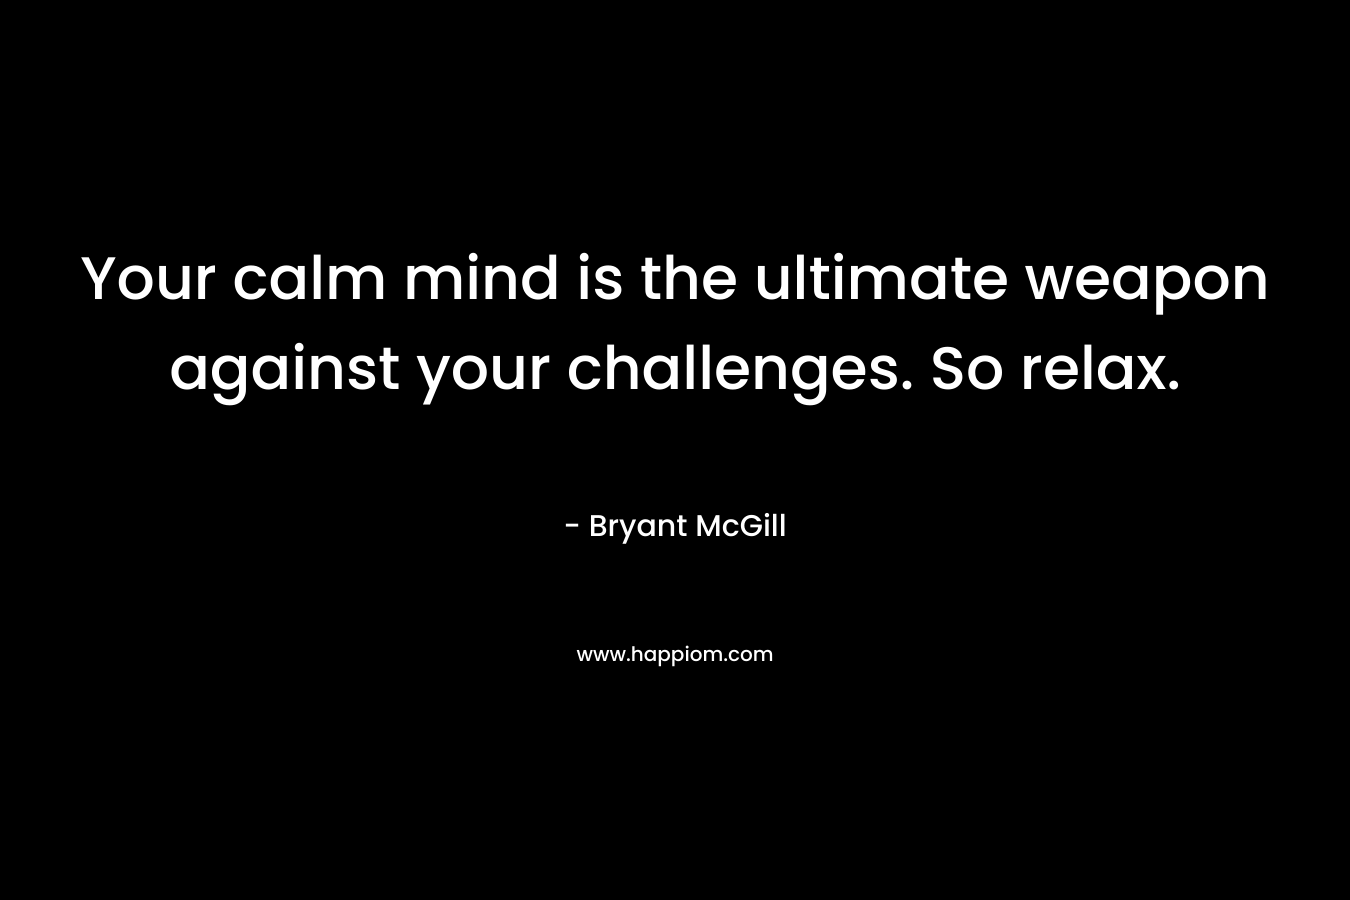 Your calm mind is the ultimate weapon against your challenges. So relax.